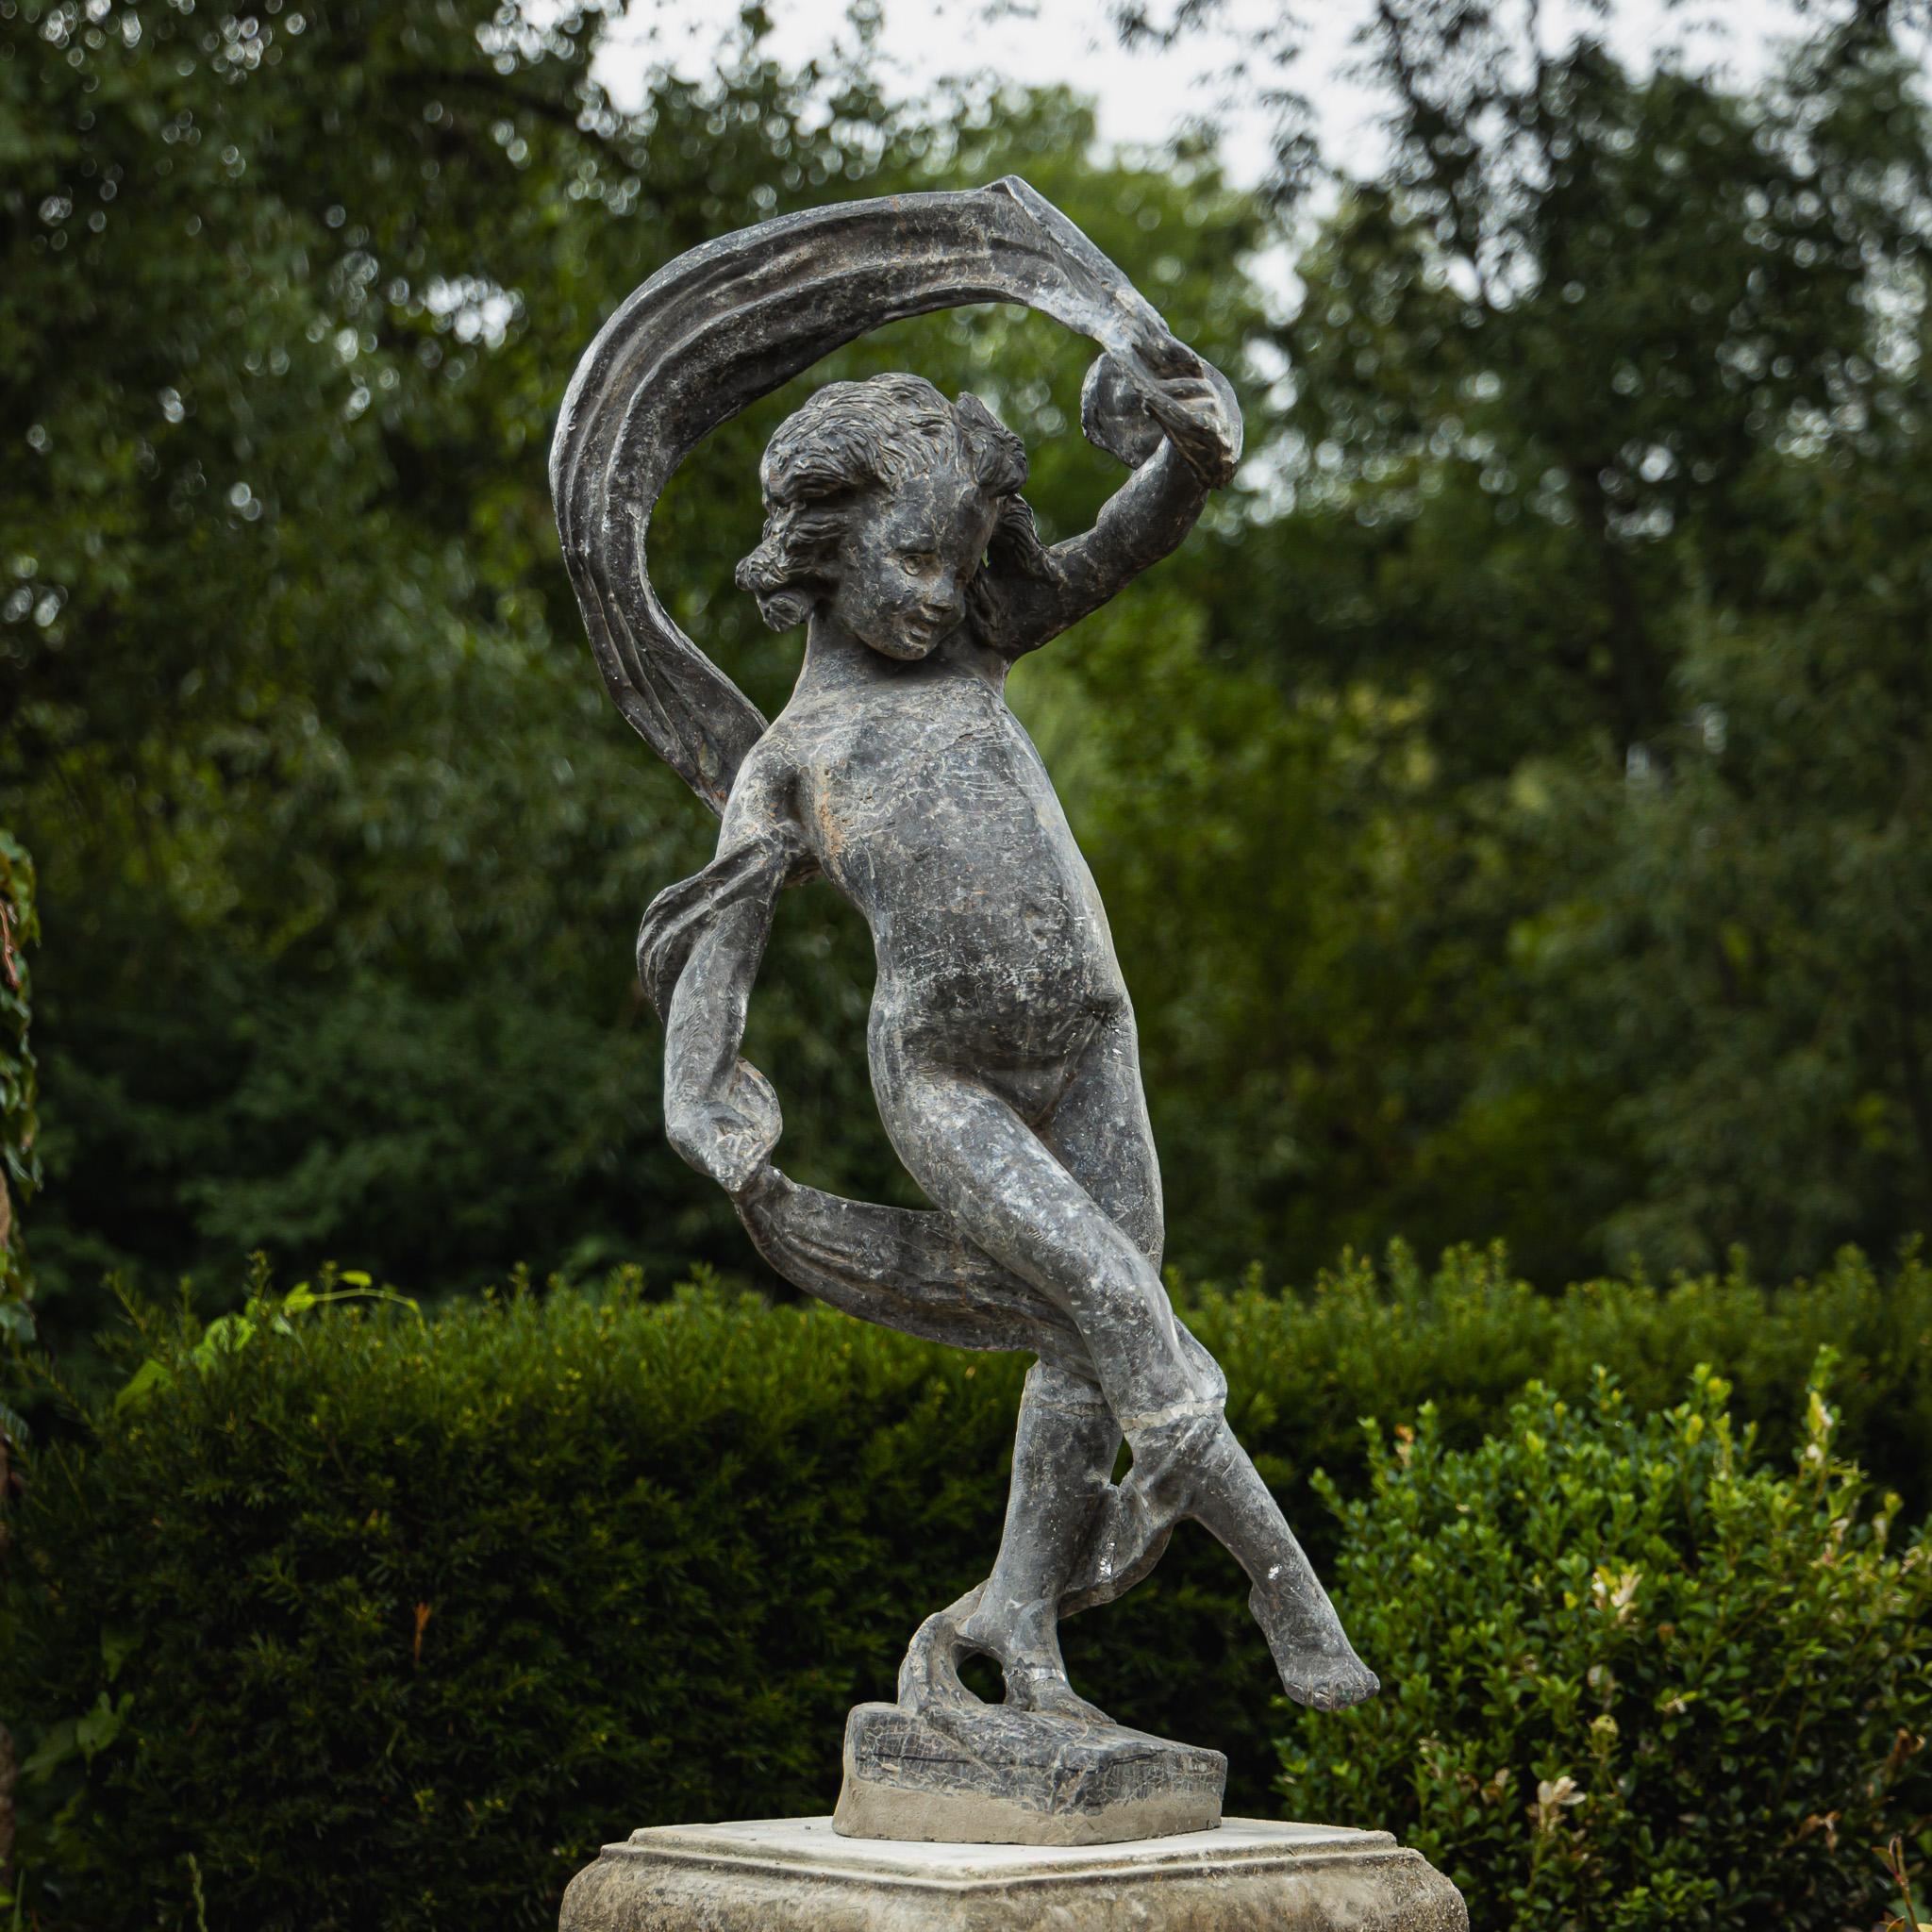 Garden figure of a dancing girl made of lead. The girl is depicted with a scarf, which winds around her body, swept up by the wind. The lead sculpture is a classic and well-known from English parks. It has been partially restored. The figure is